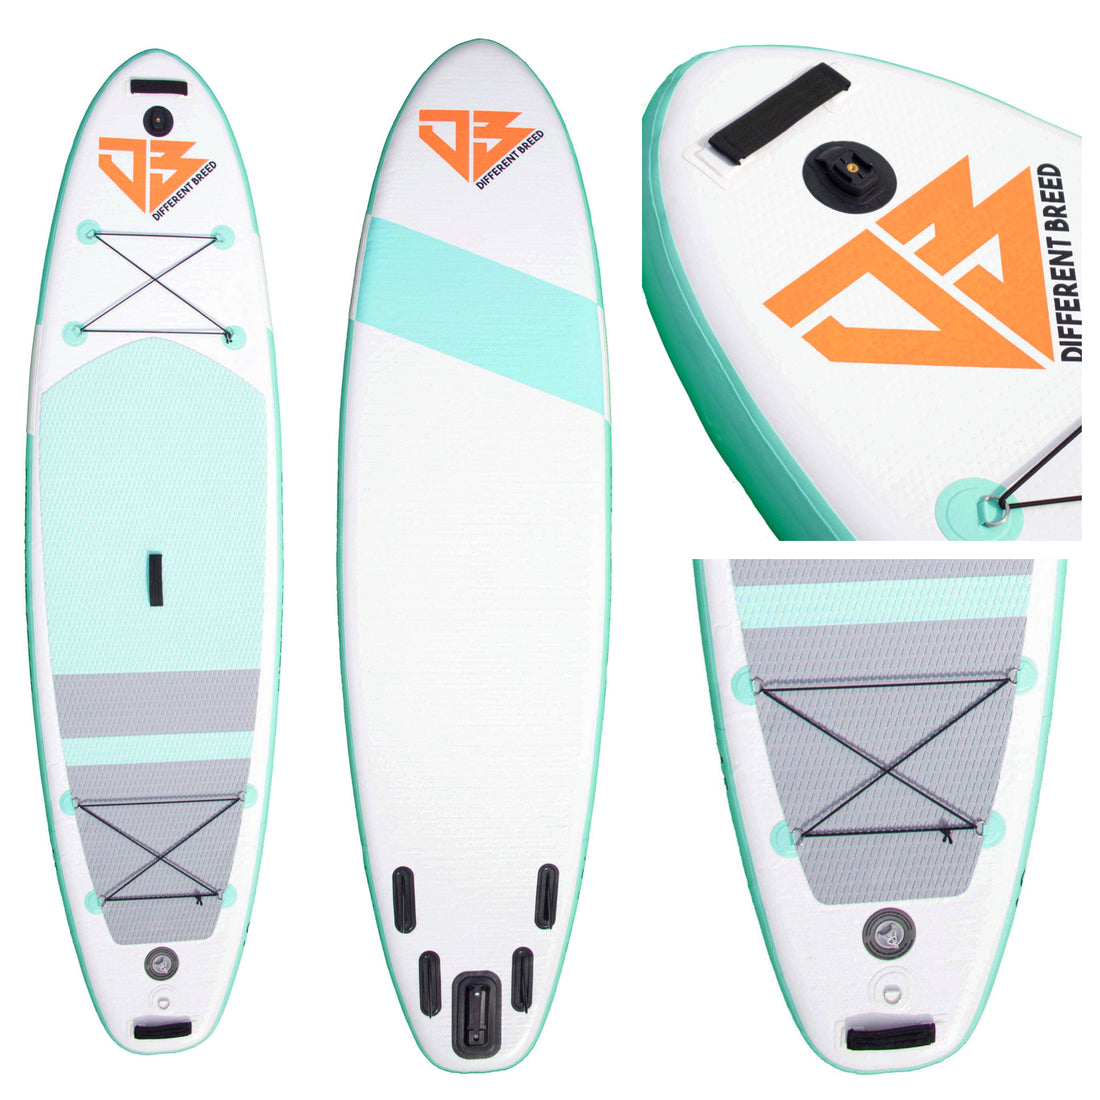 Different Breed Premium Inflatable Paddleboard iSUP Pump UP Jam!